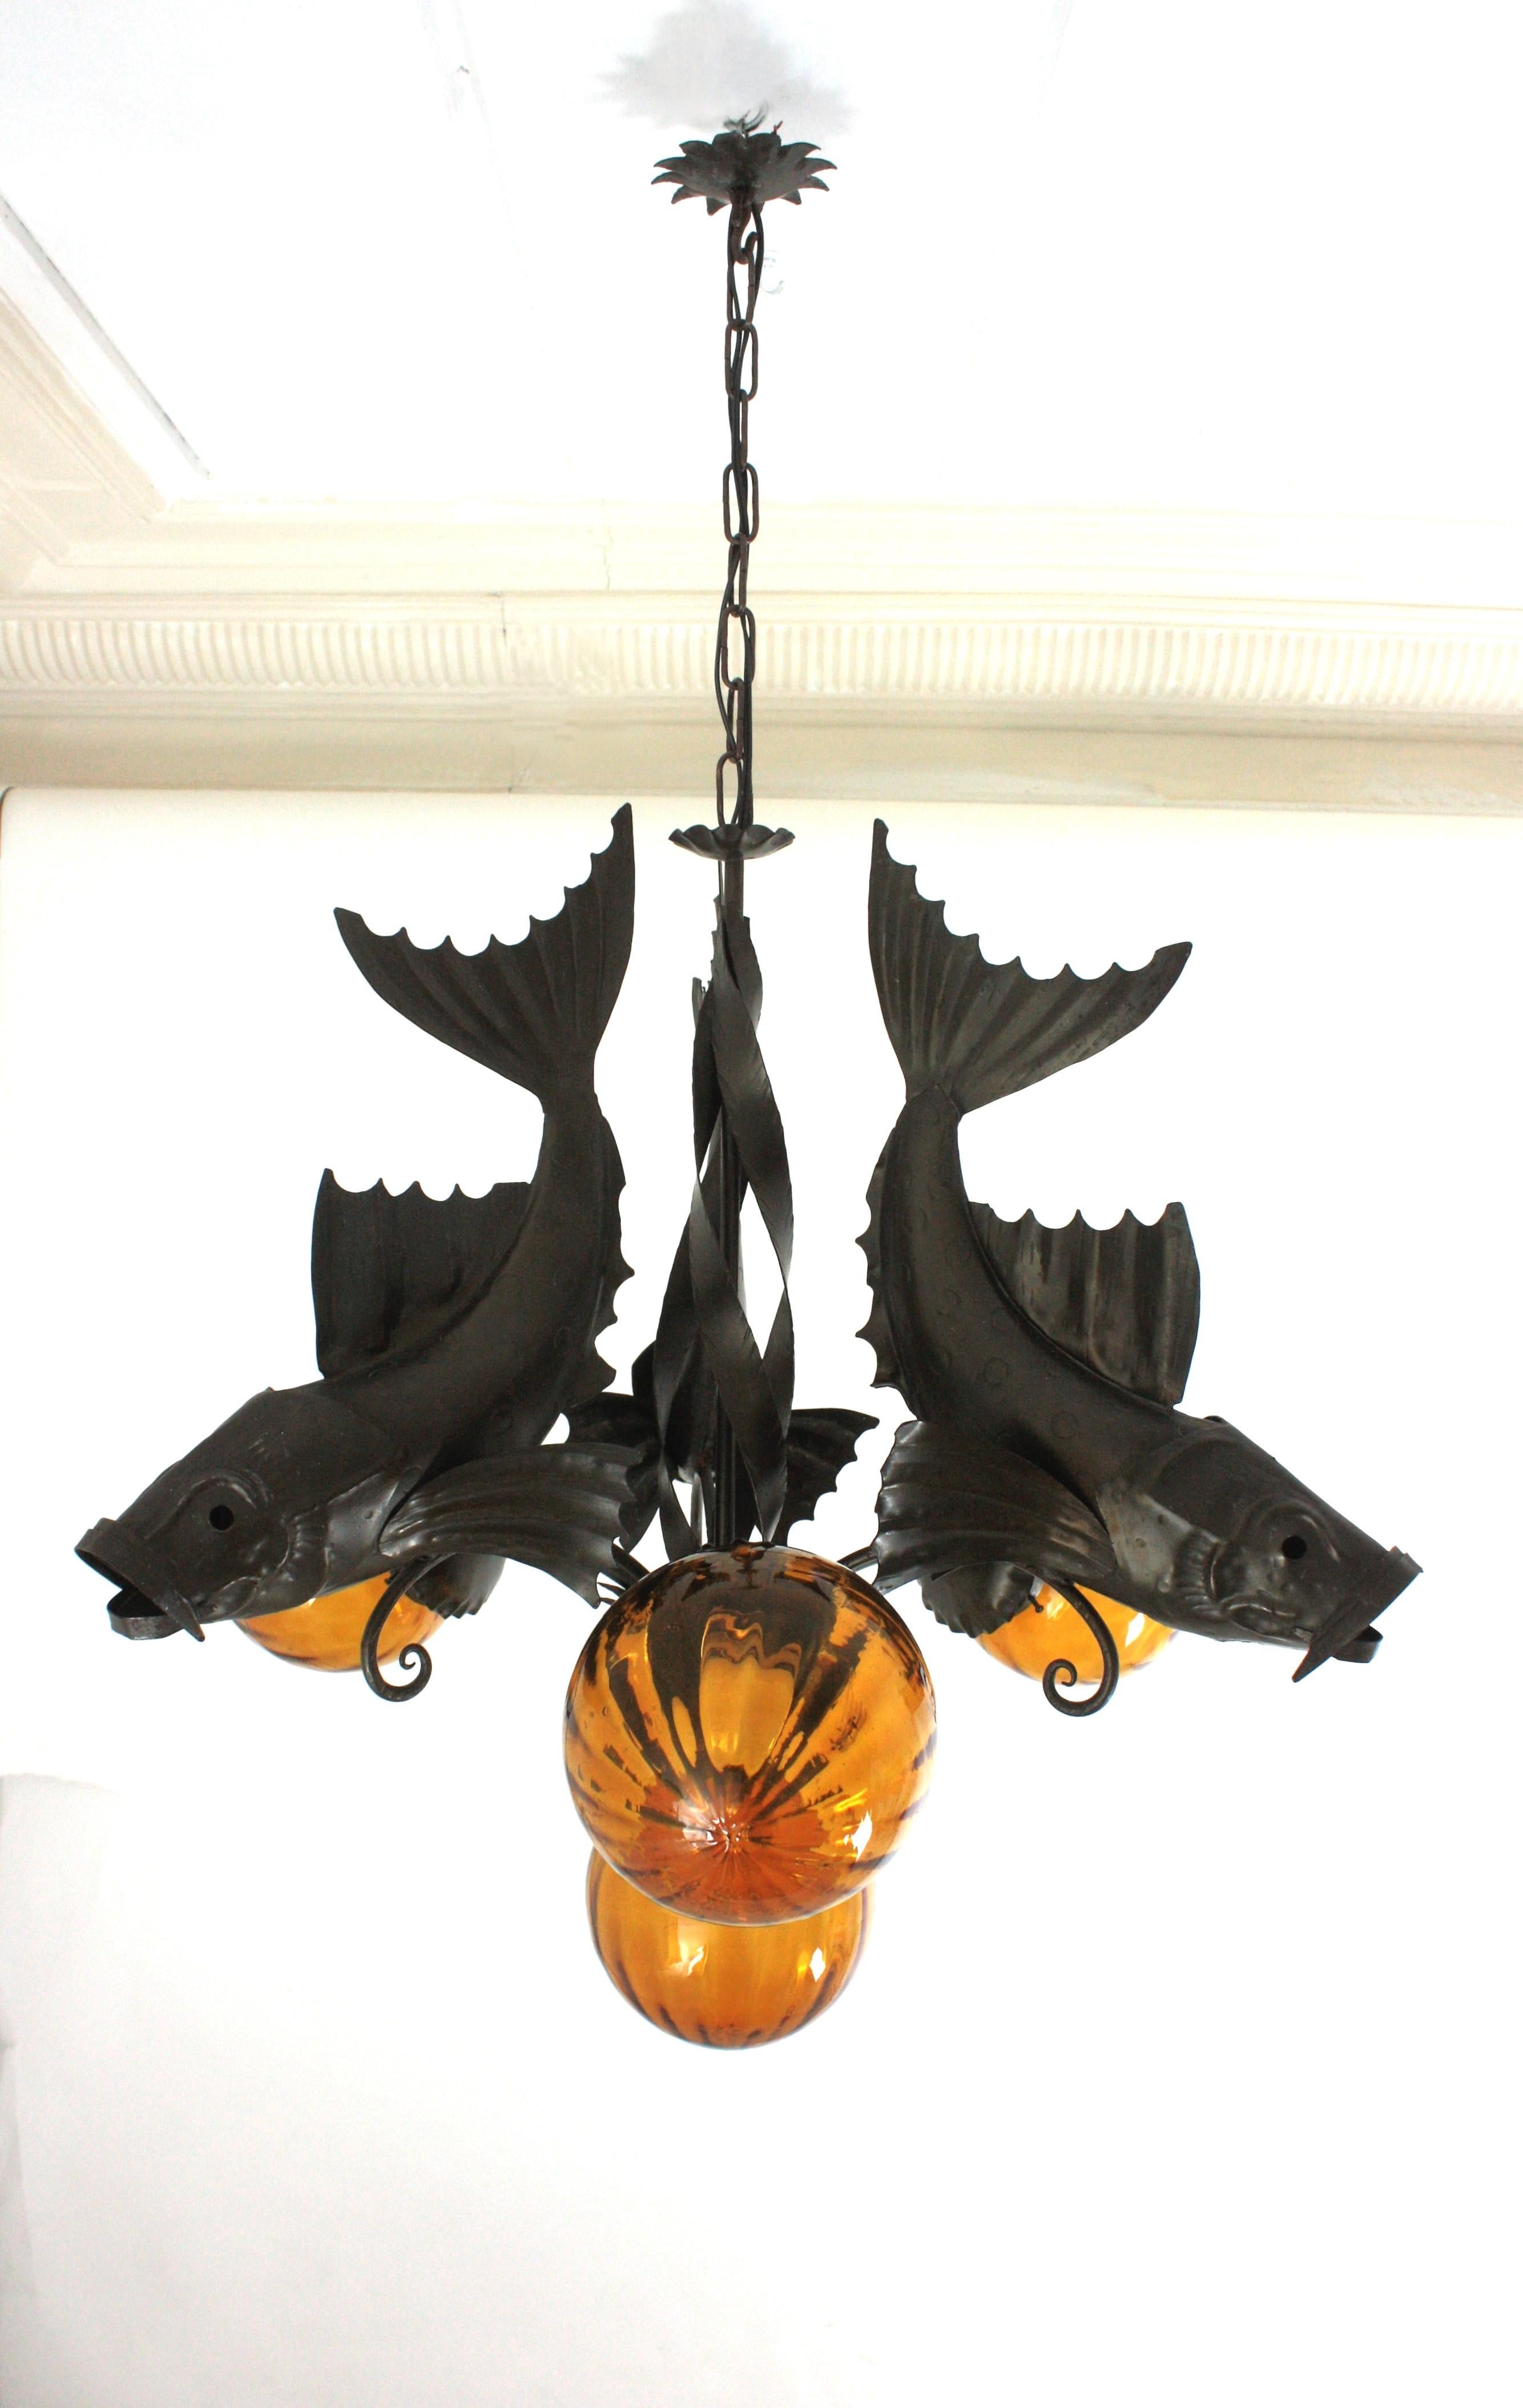 20th Century Spanish Wrought Iron and Amber Glass Chandelier, Fish Design For Sale